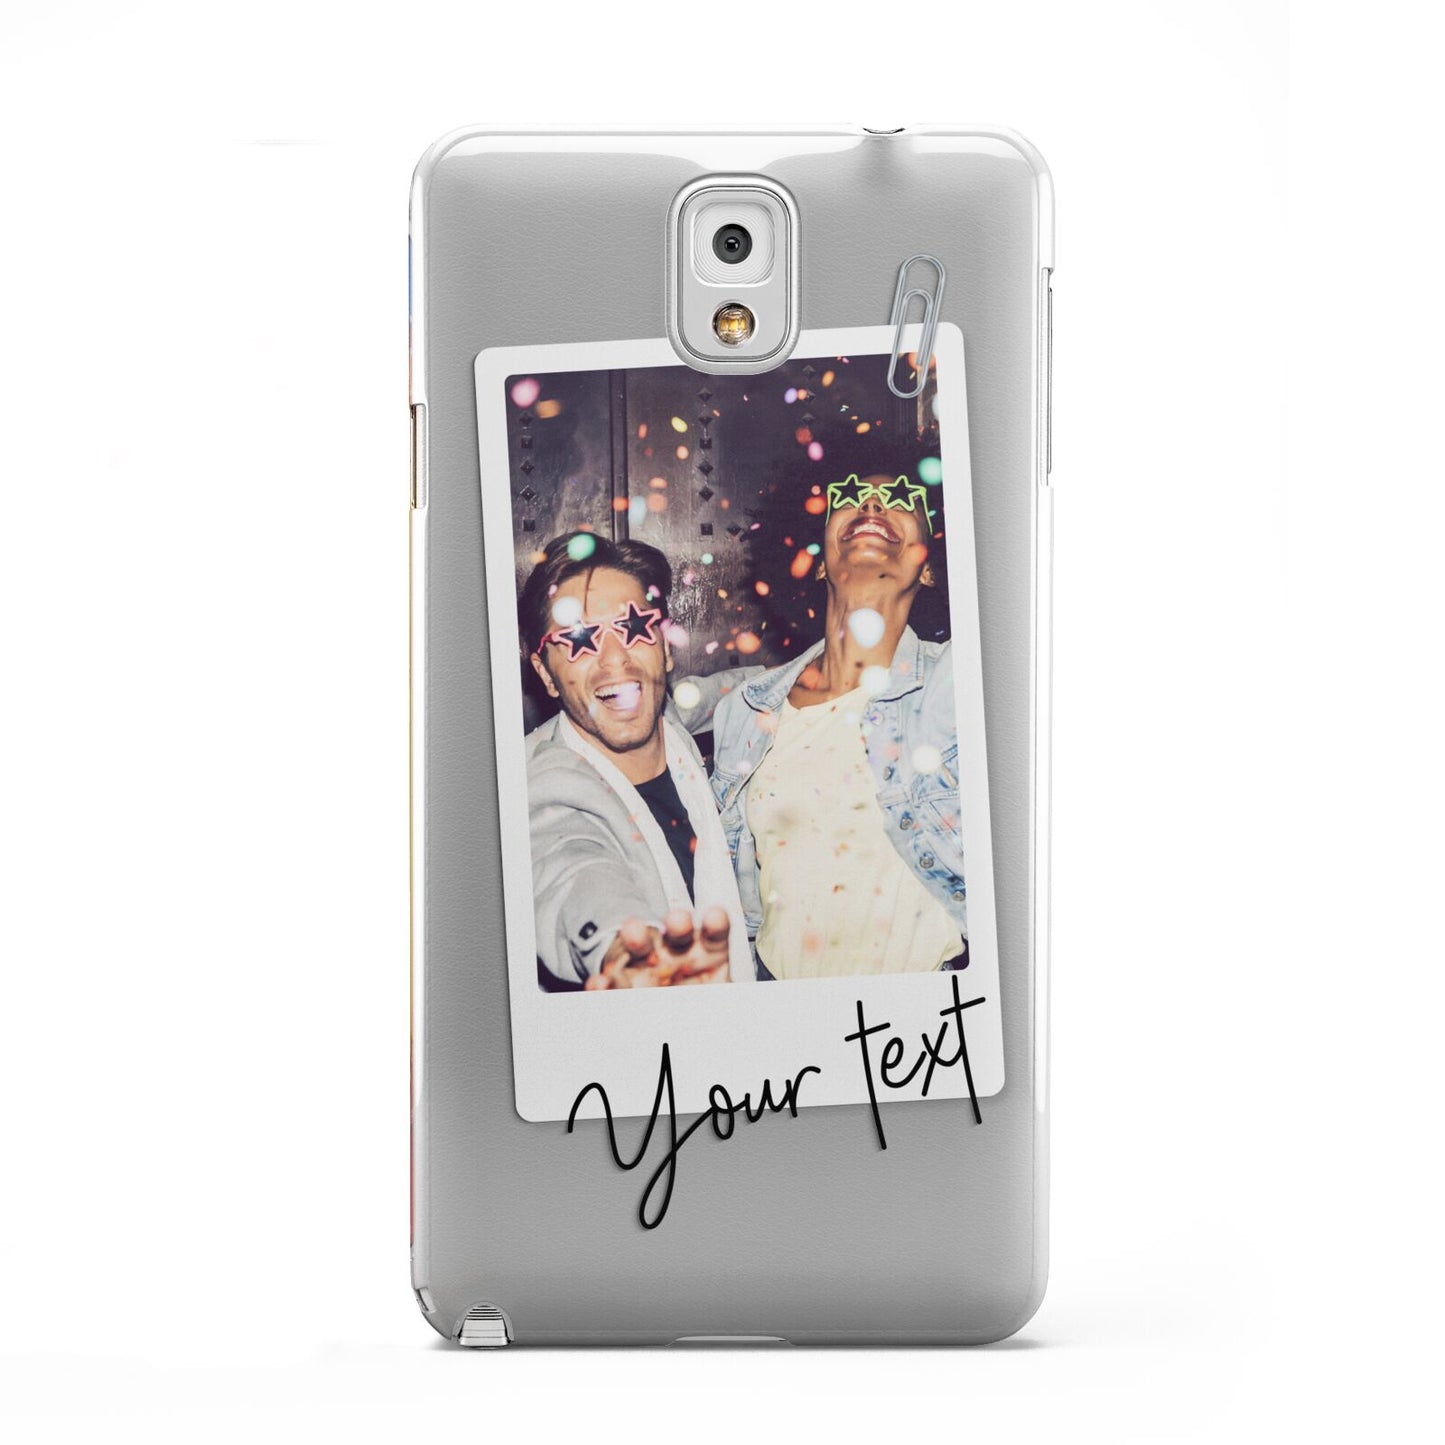 Personalised Photo with Text Samsung Galaxy Note 3 Case